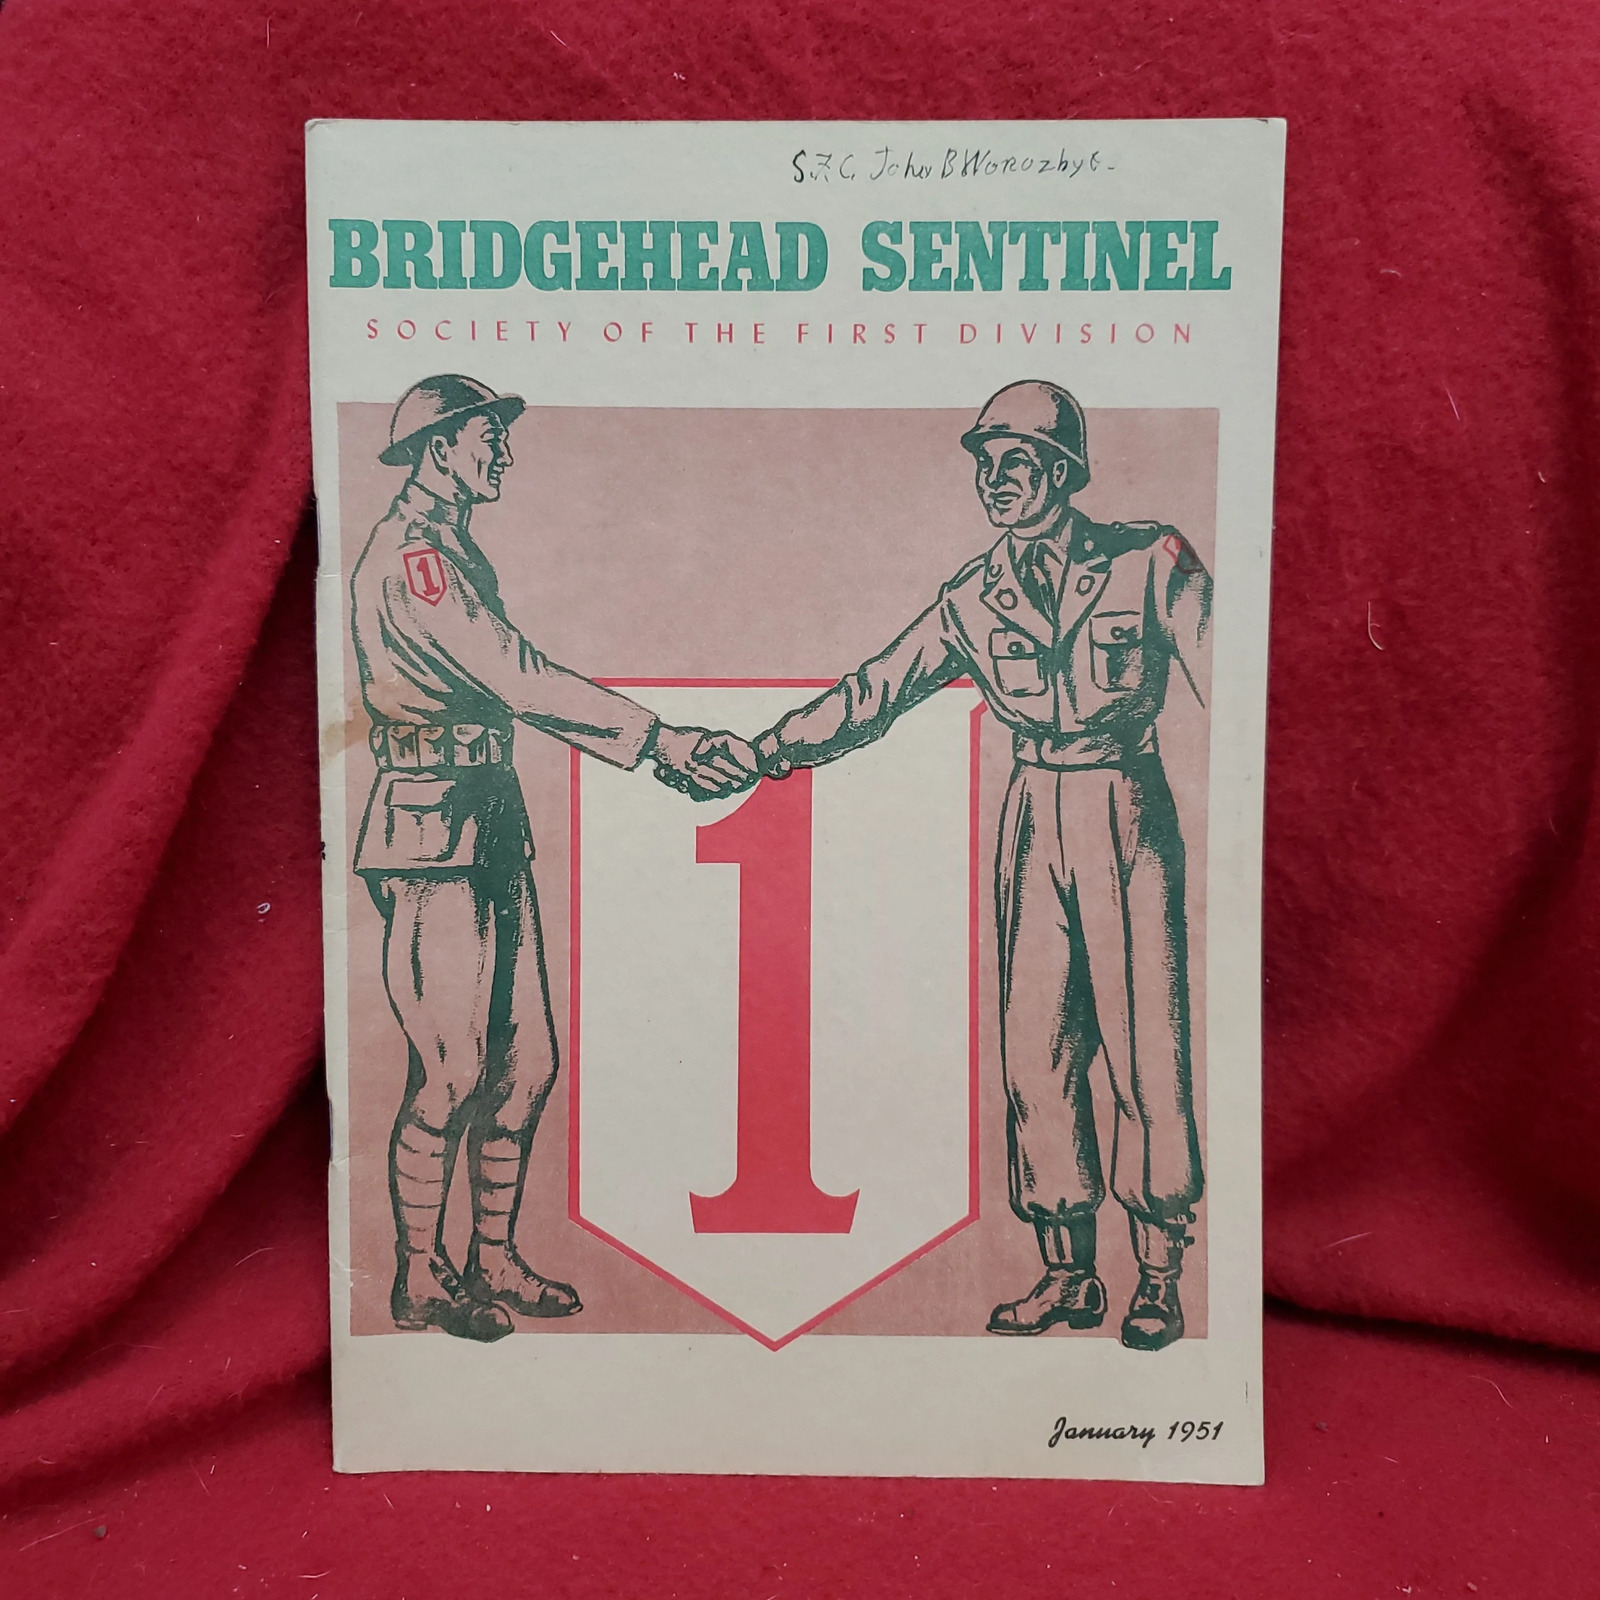 Vintage January 1951 BRIDGEHEAD SENTINEL Society of the First Division (27s)